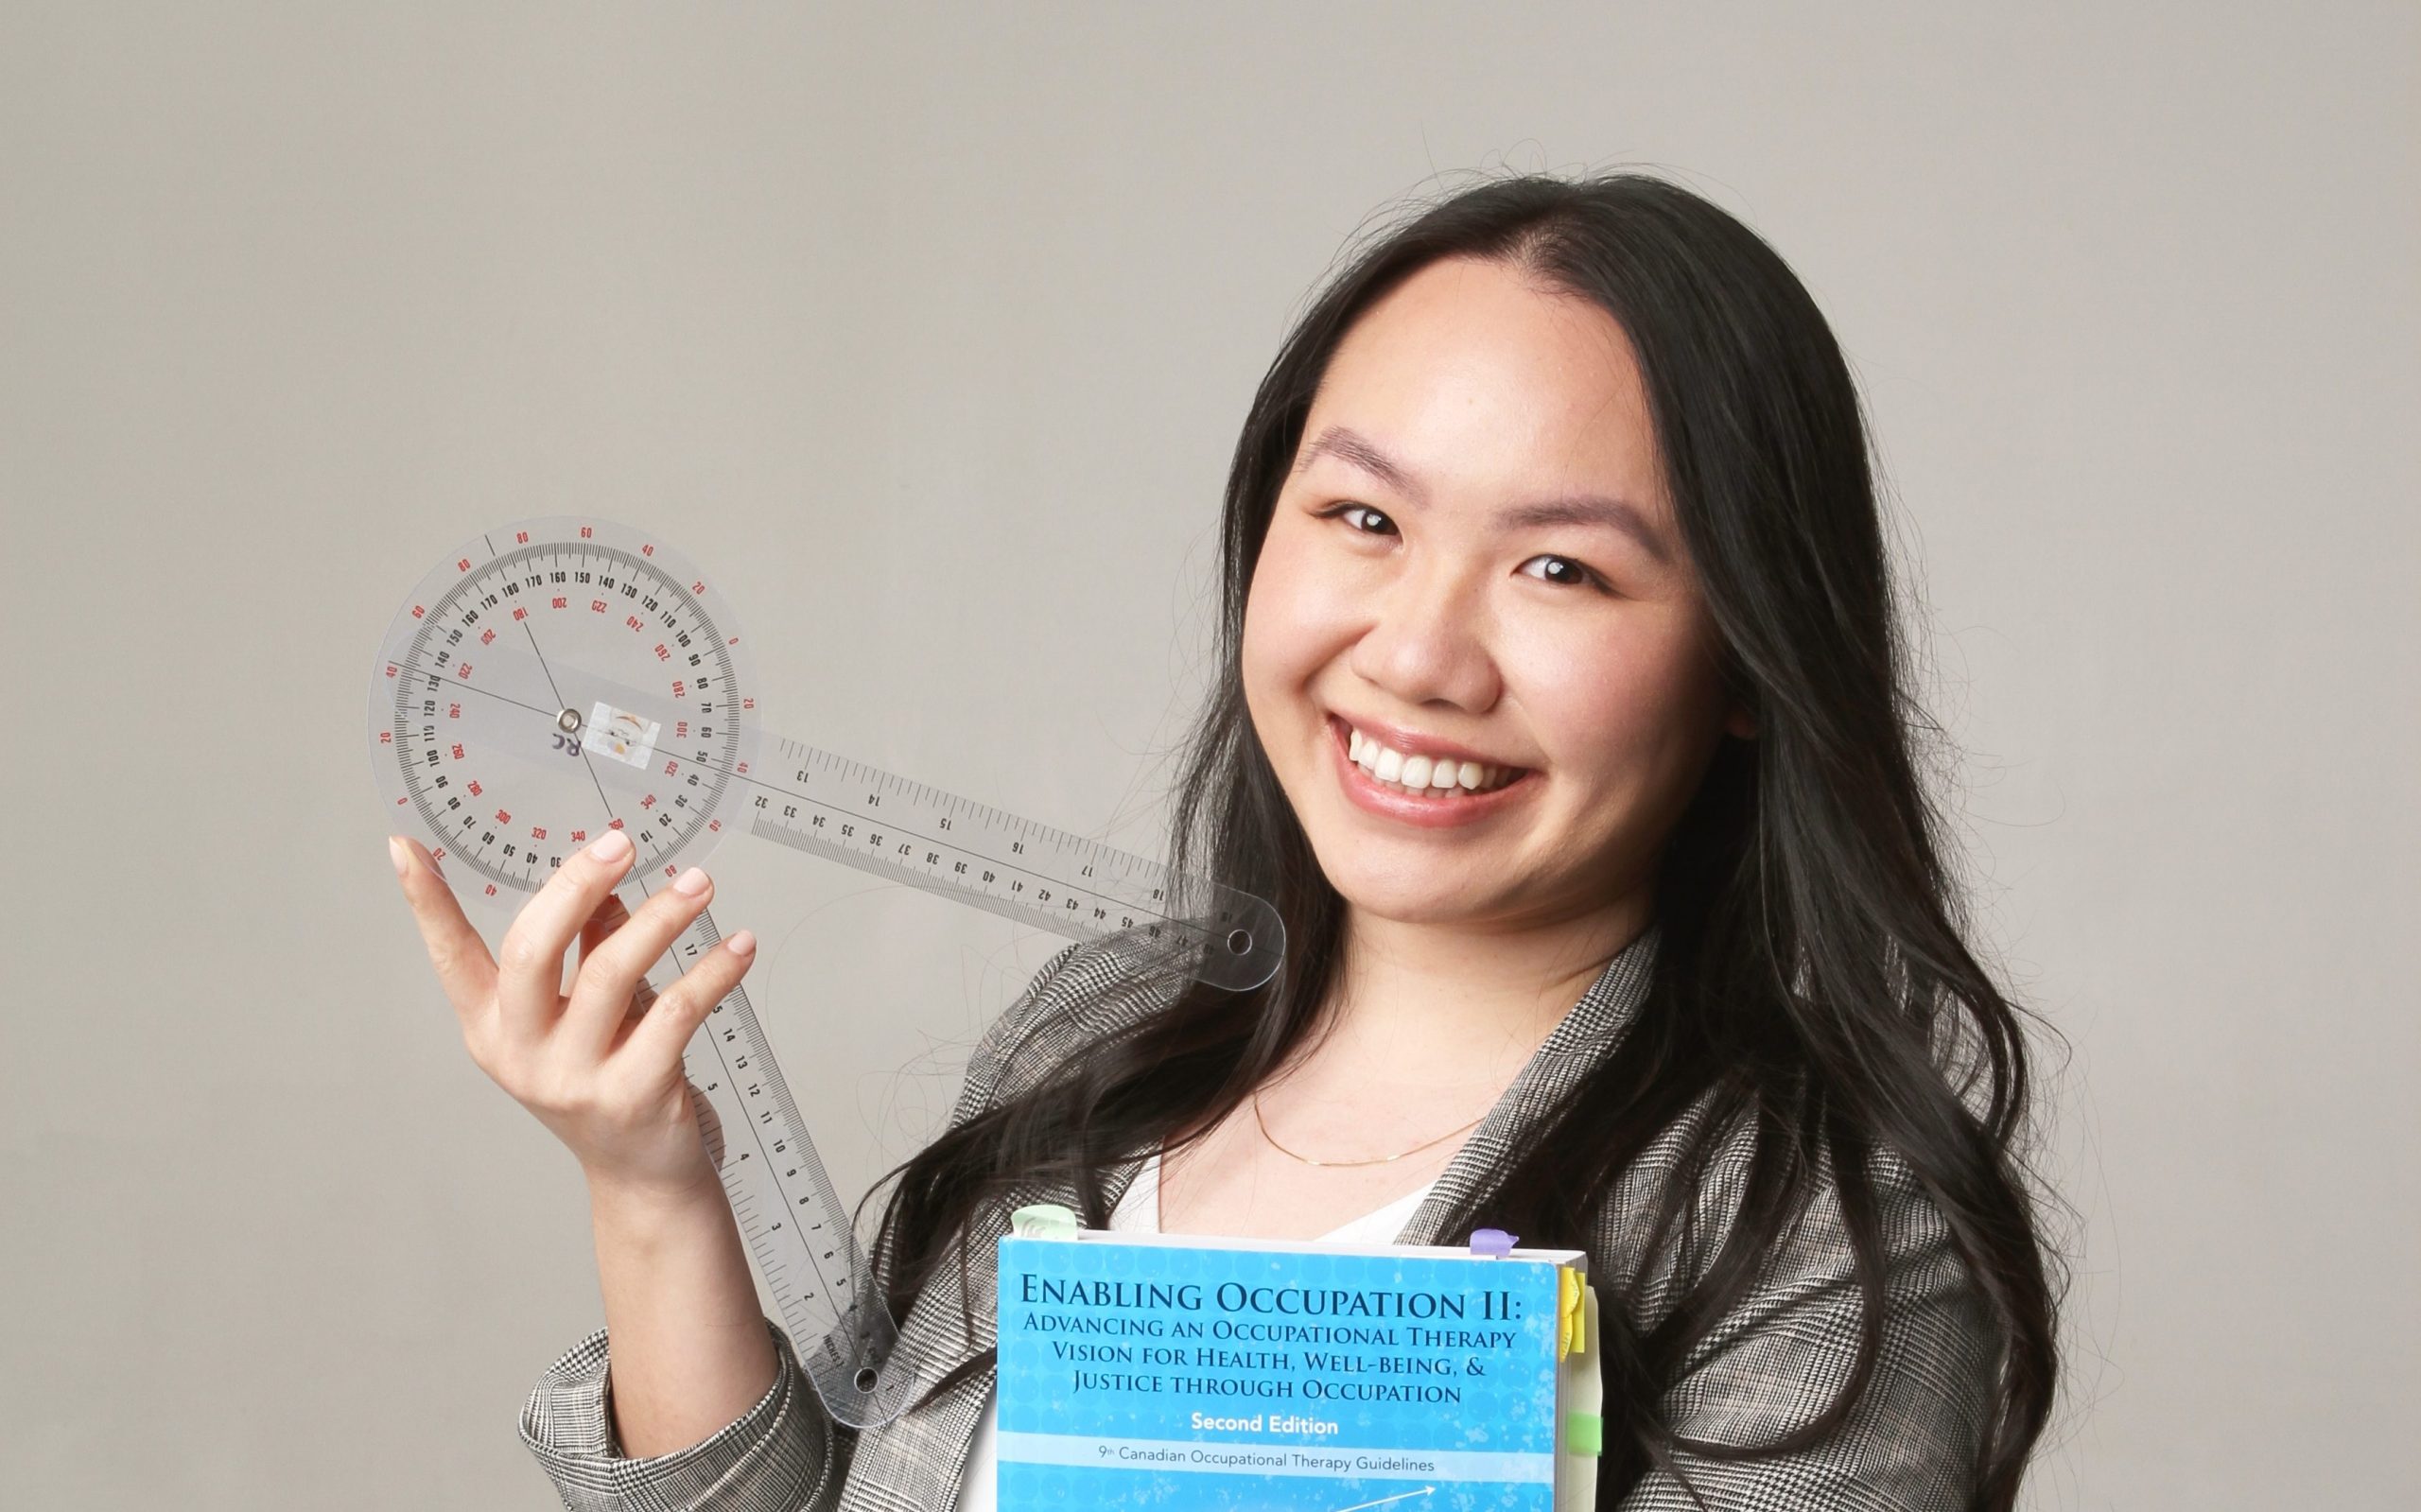 A professional headshot of Rosemary, who is holding a compass and a textbook about occupational therapy